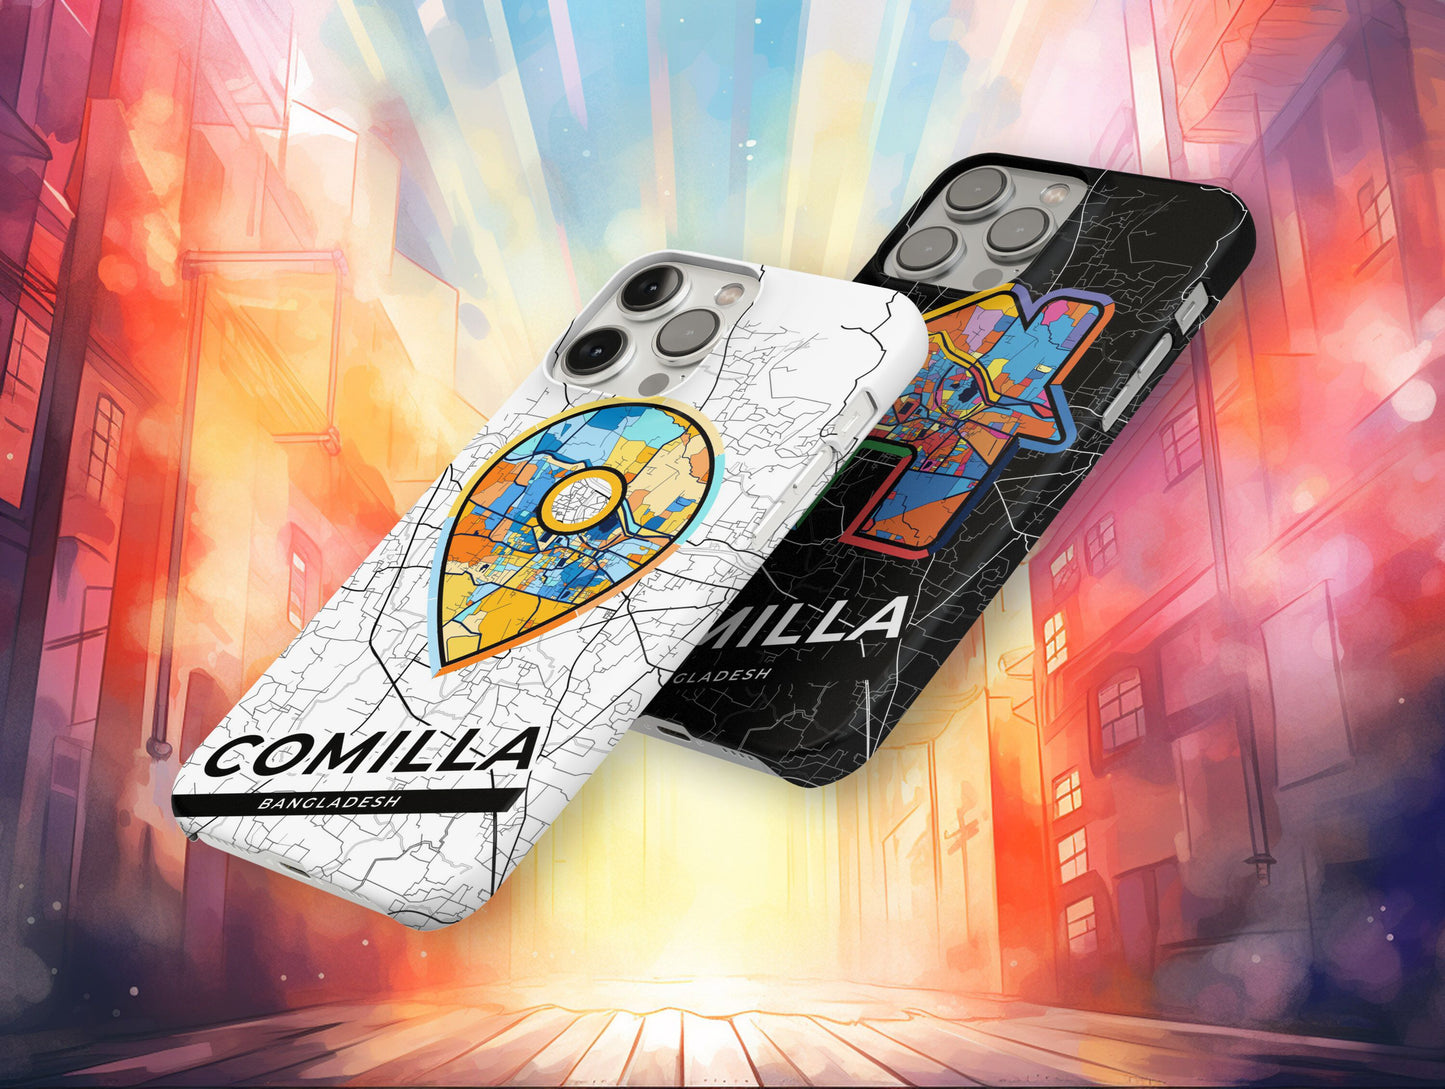 Comilla Bangladesh slim phone case with colorful icon. Birthday, wedding or housewarming gift. Couple match cases.